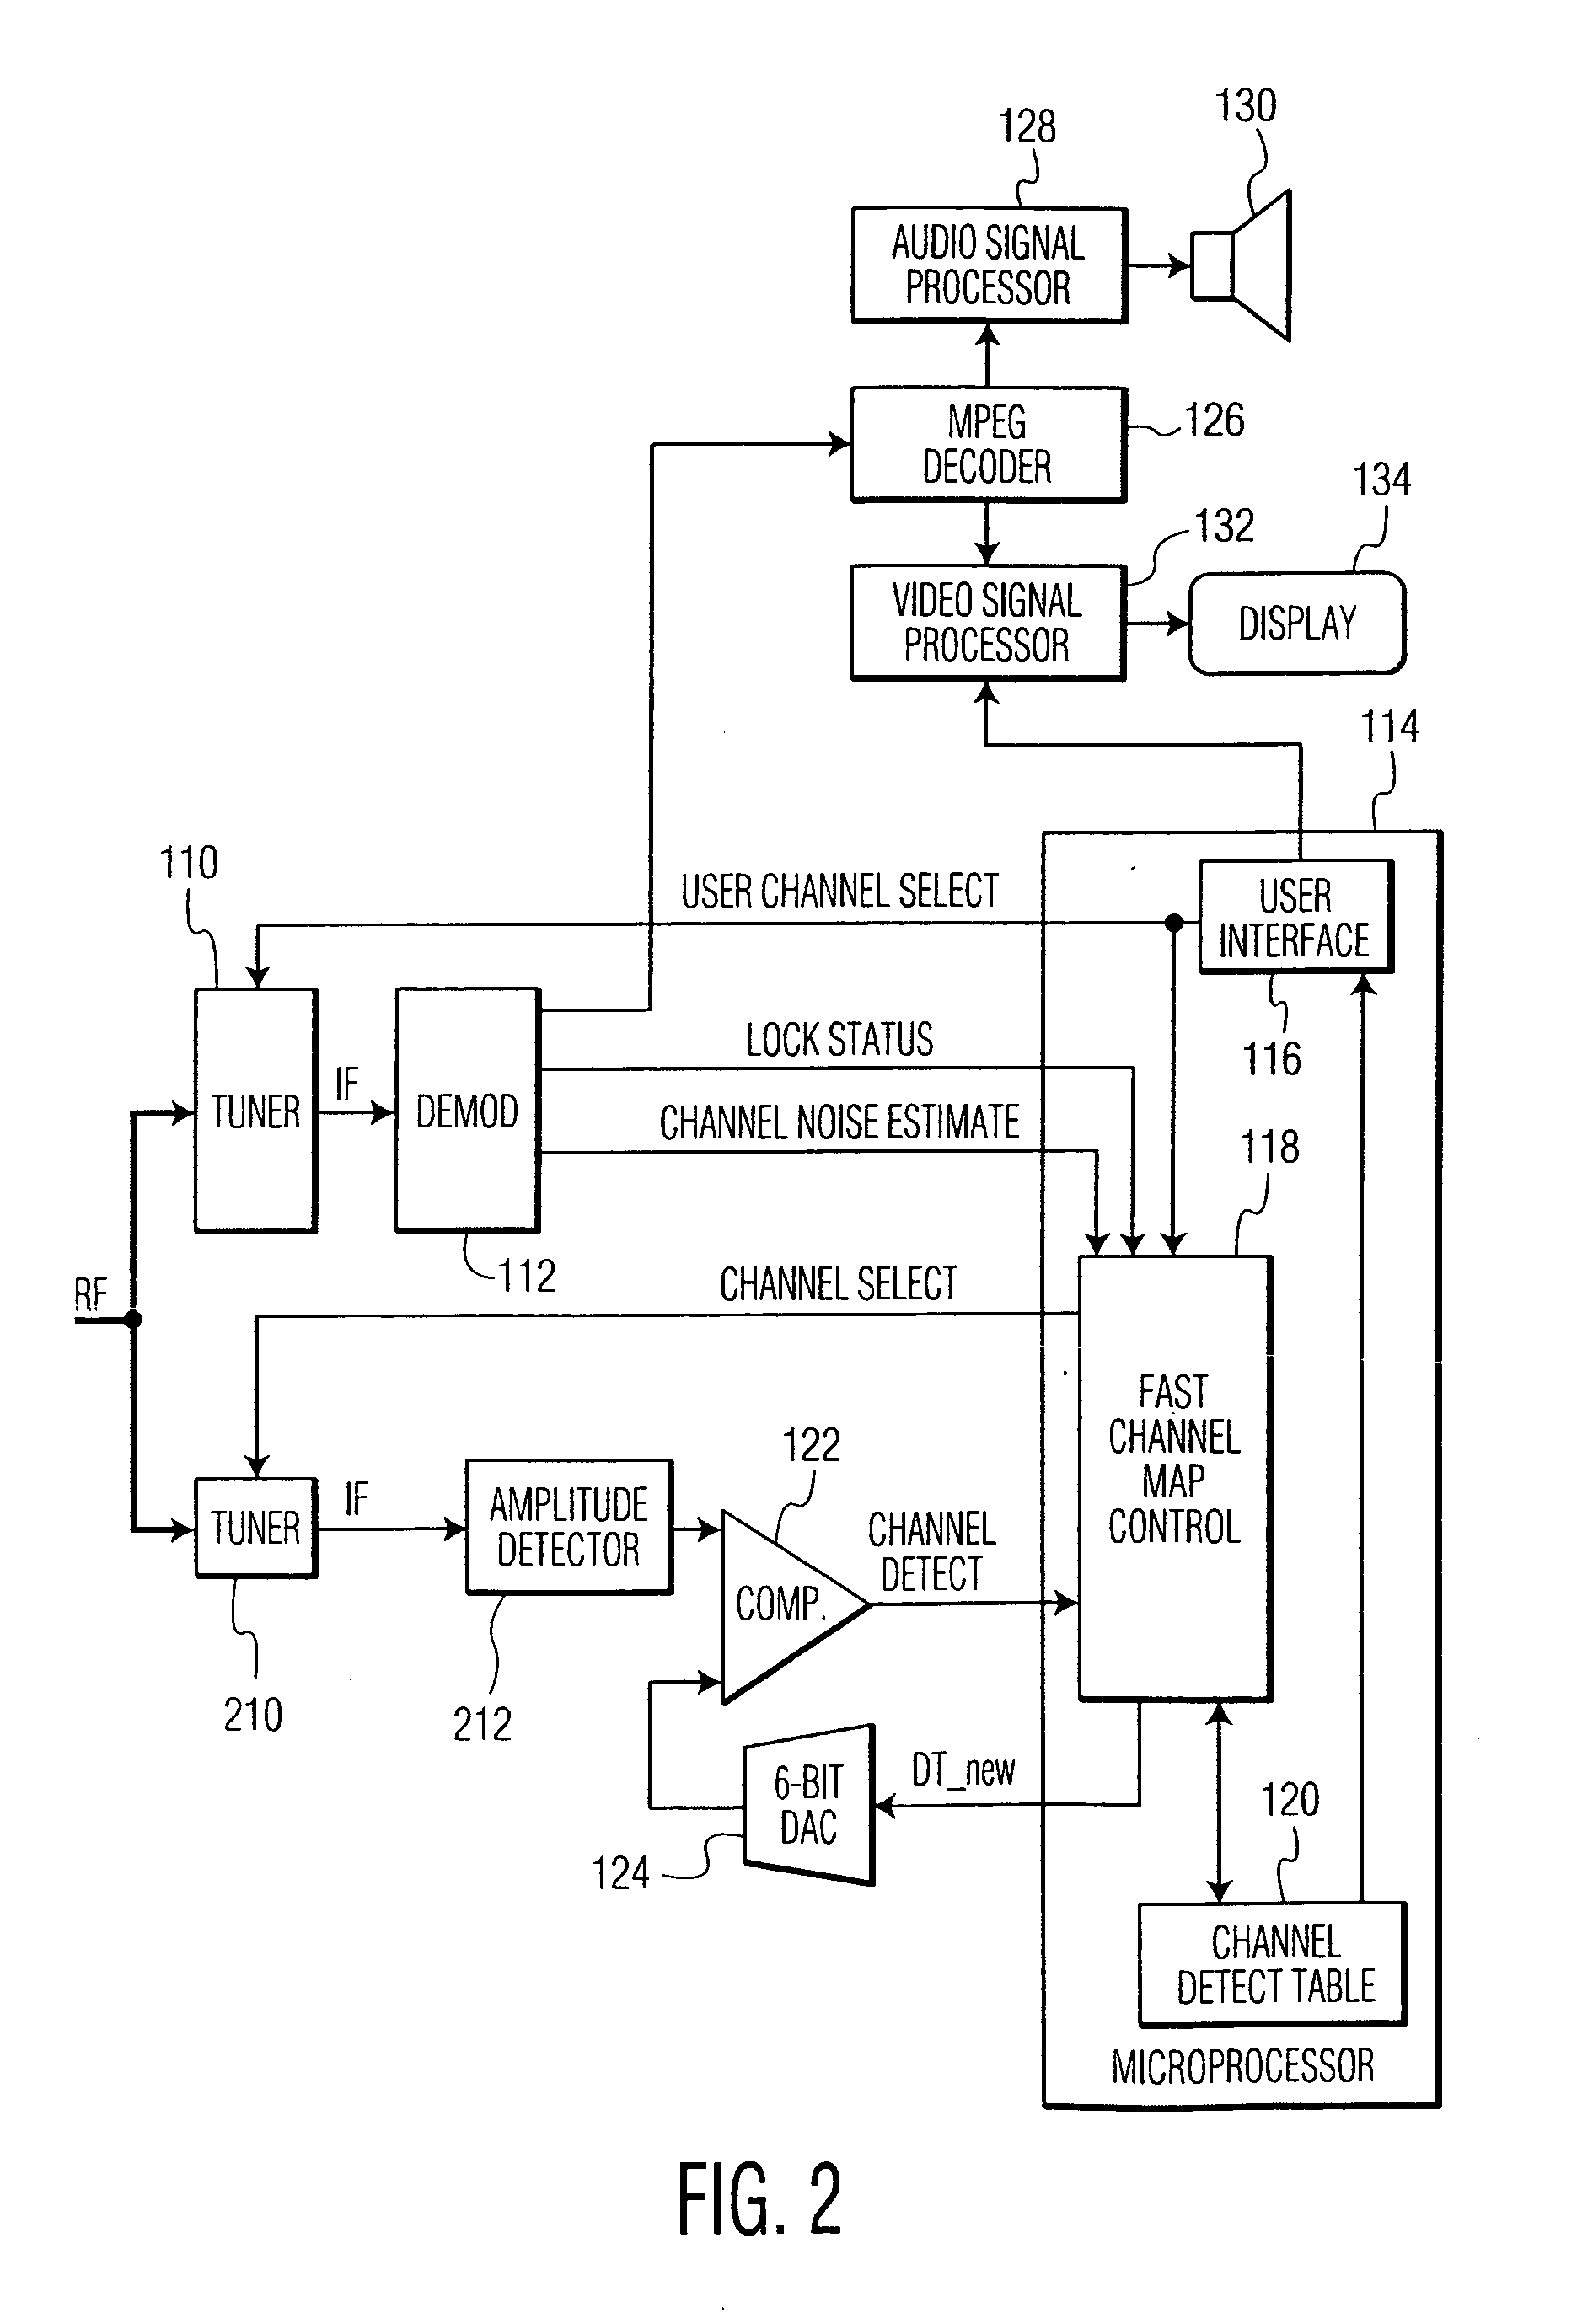 Method and apparatus for deriving a channel map for a digital television receiver